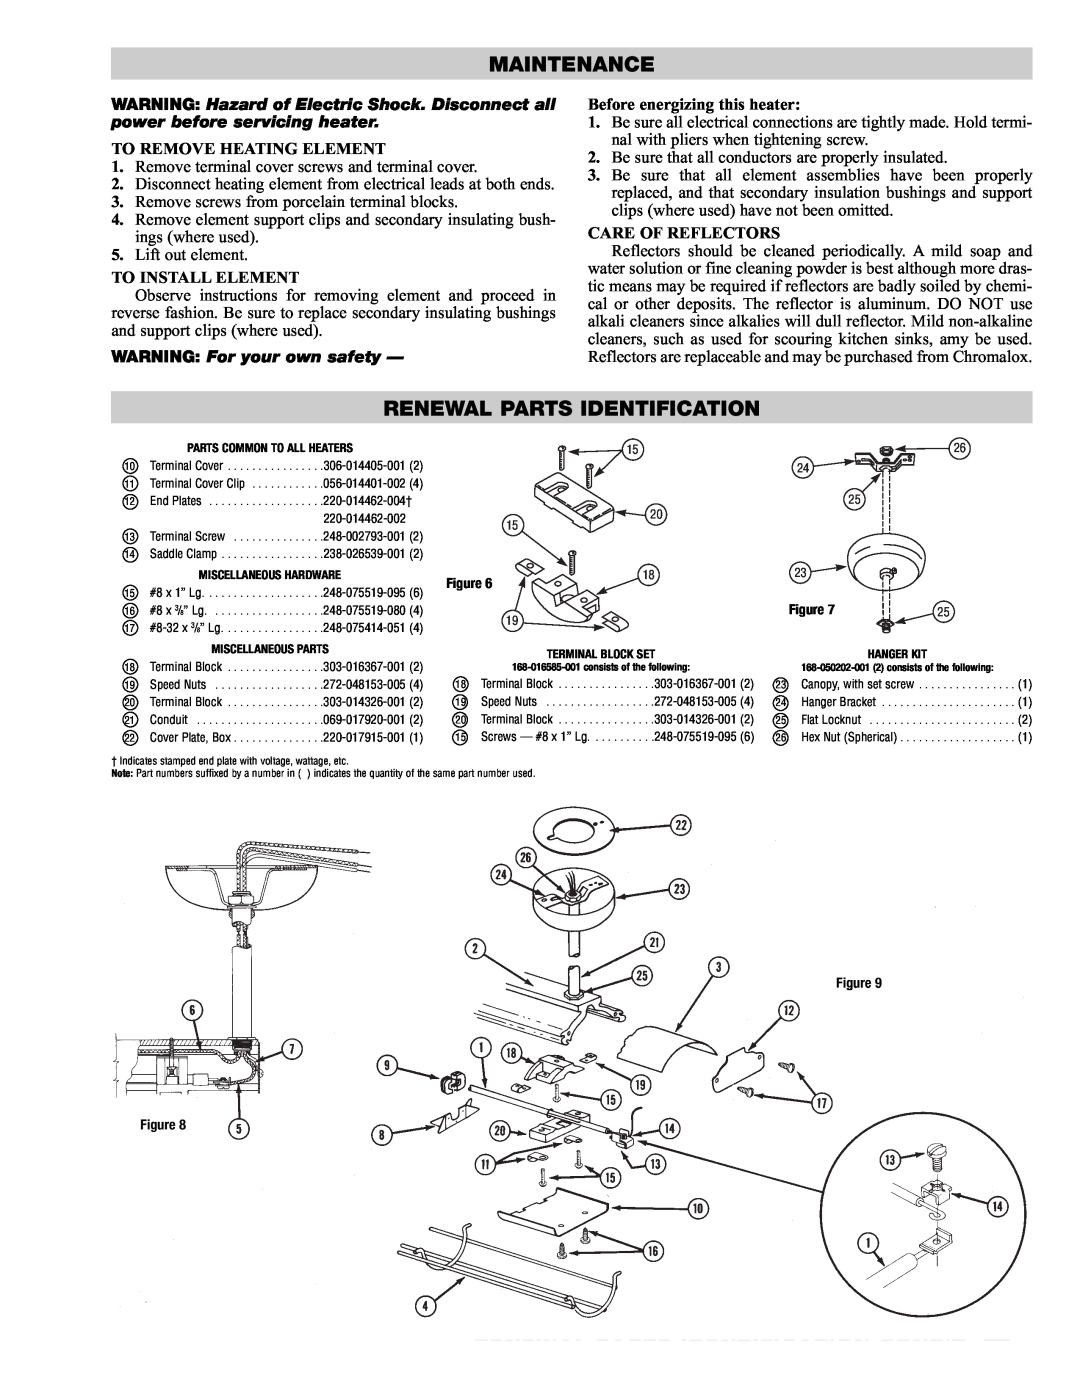 Chromalox PG417-3 specifications Maintenance, Renewal Parts Identification, To Remove Heating Element, To Install Element 